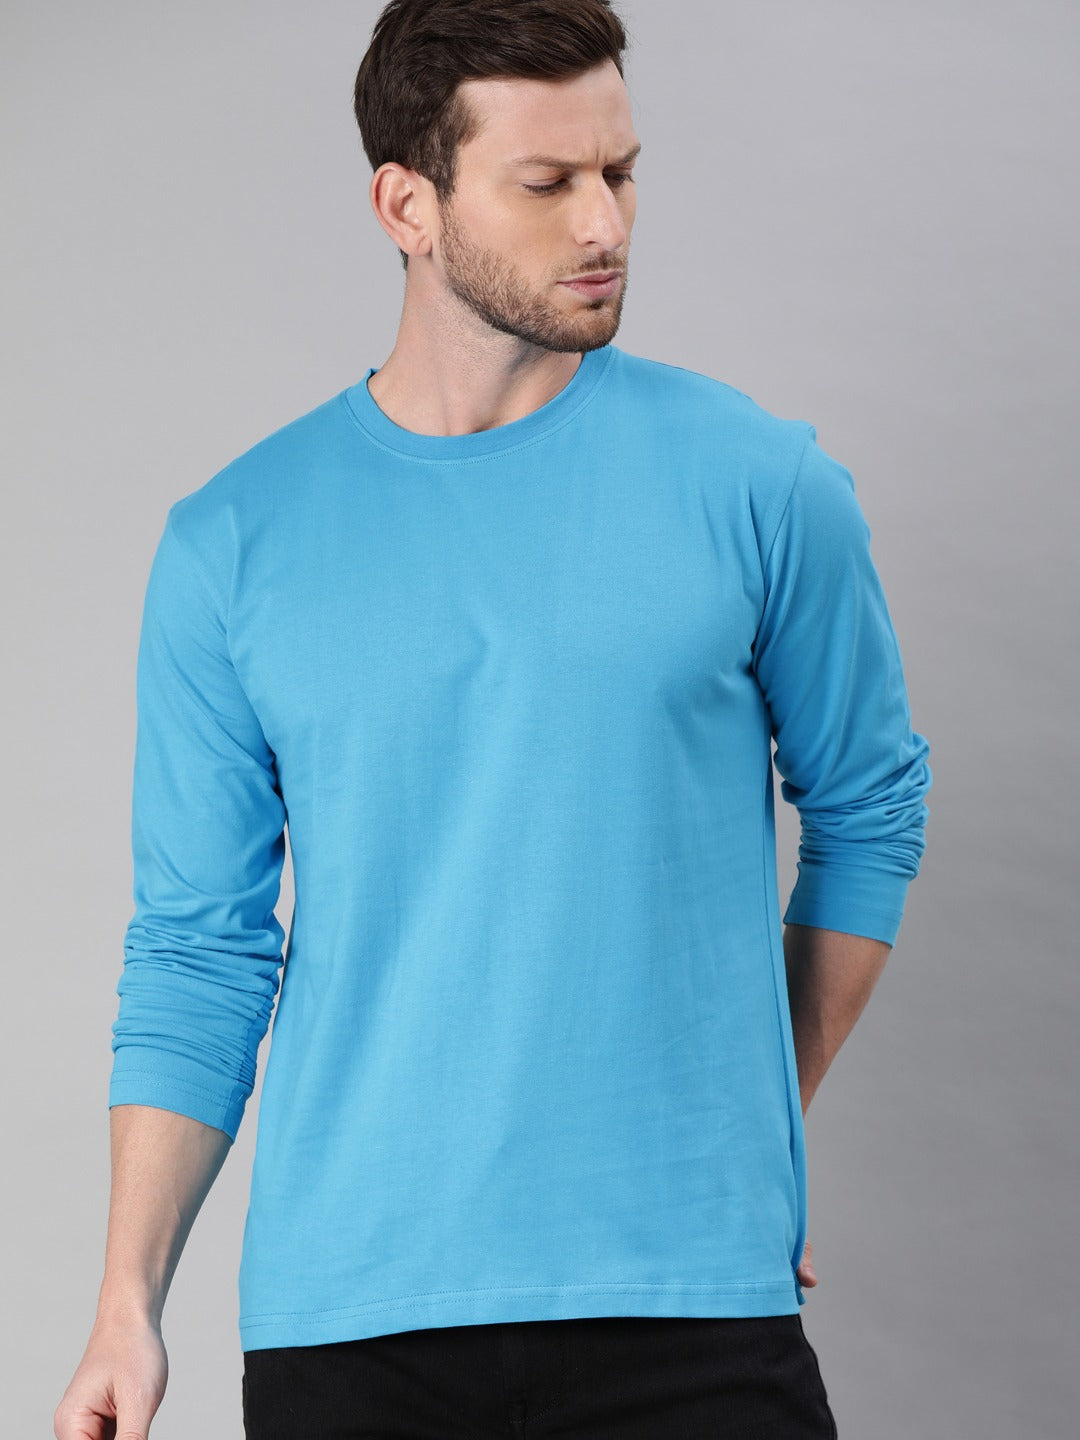 Buy Plain Sky Blue Sleeves T-Shirts Online For Men in India | Be Awara